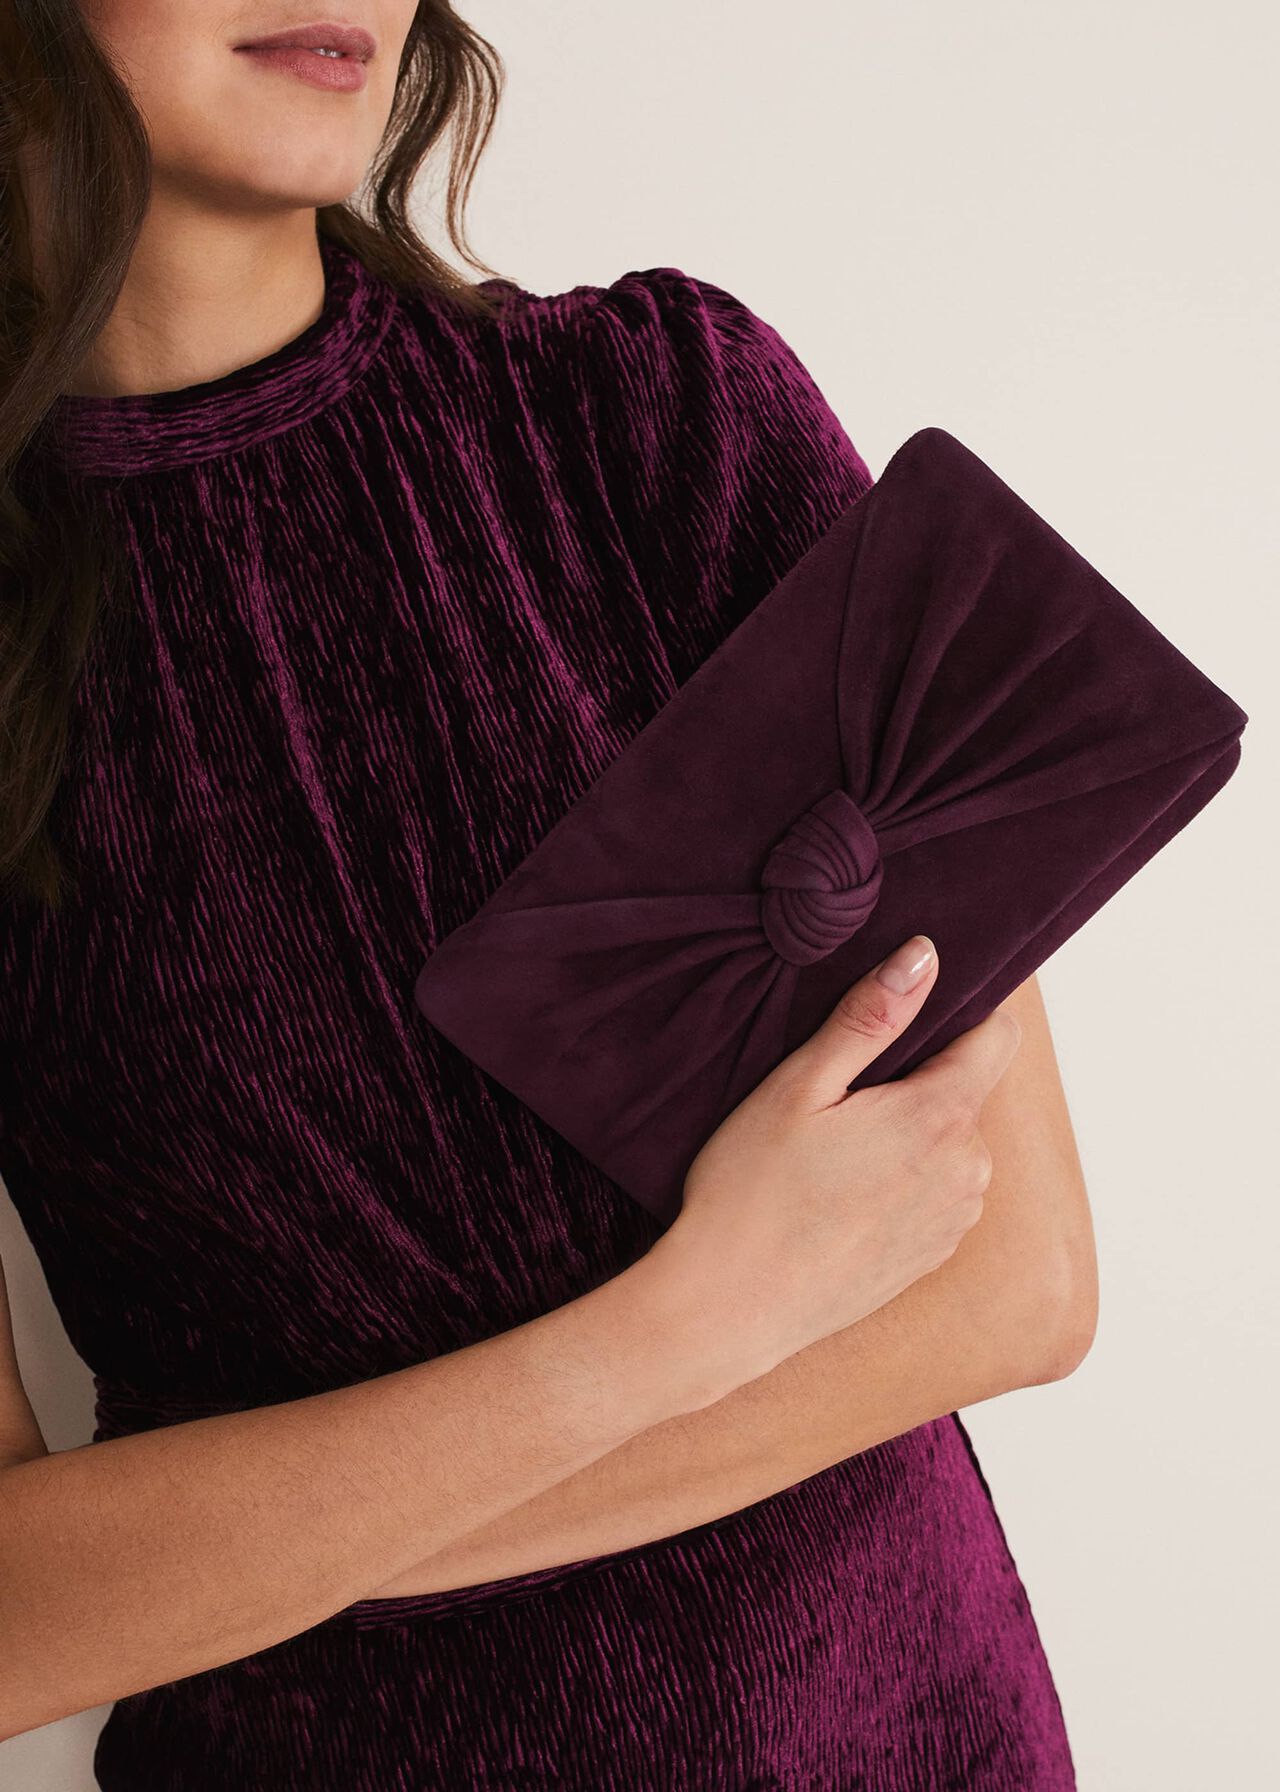 Knot Front Clutch Bag